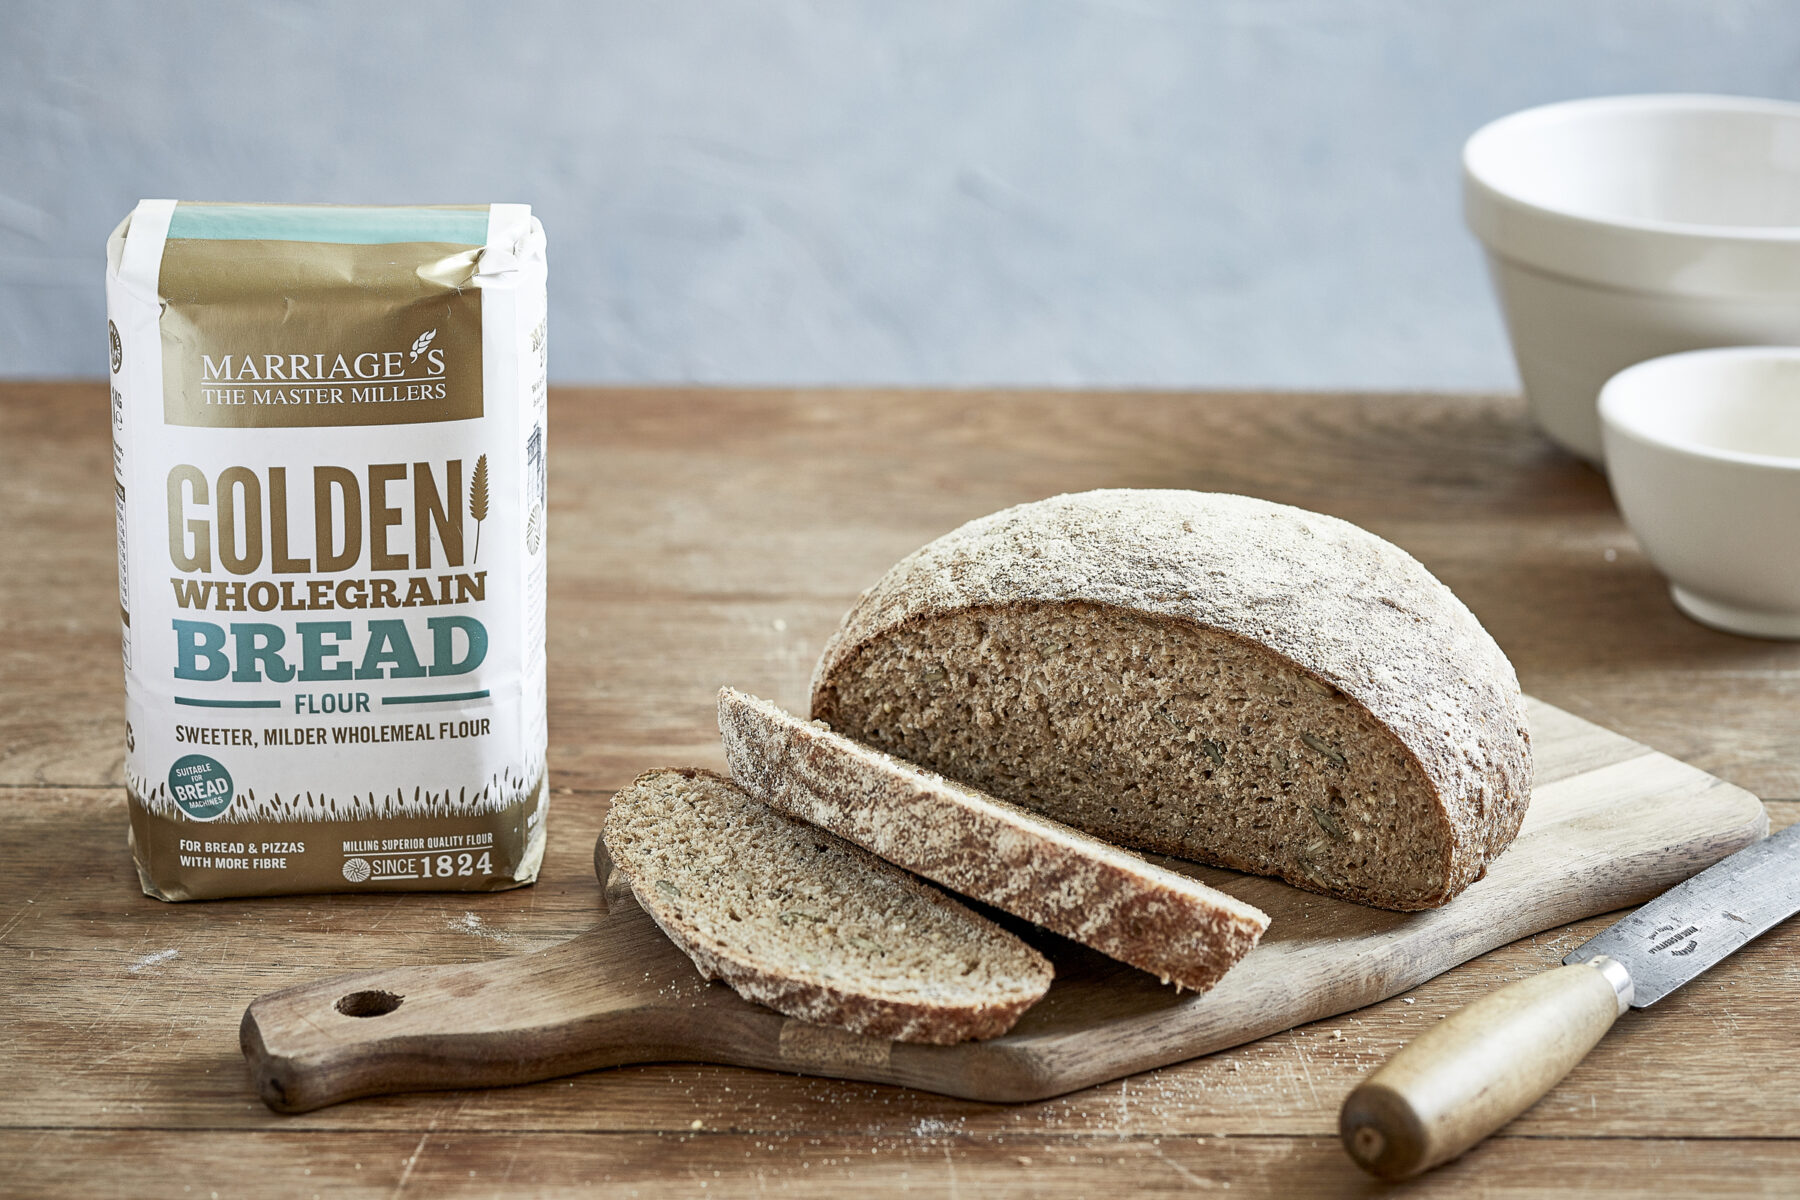 Image of Marriage's golden wholegrain bread flour in a whit and gold packet next to an oval shaped brown loaf of bread